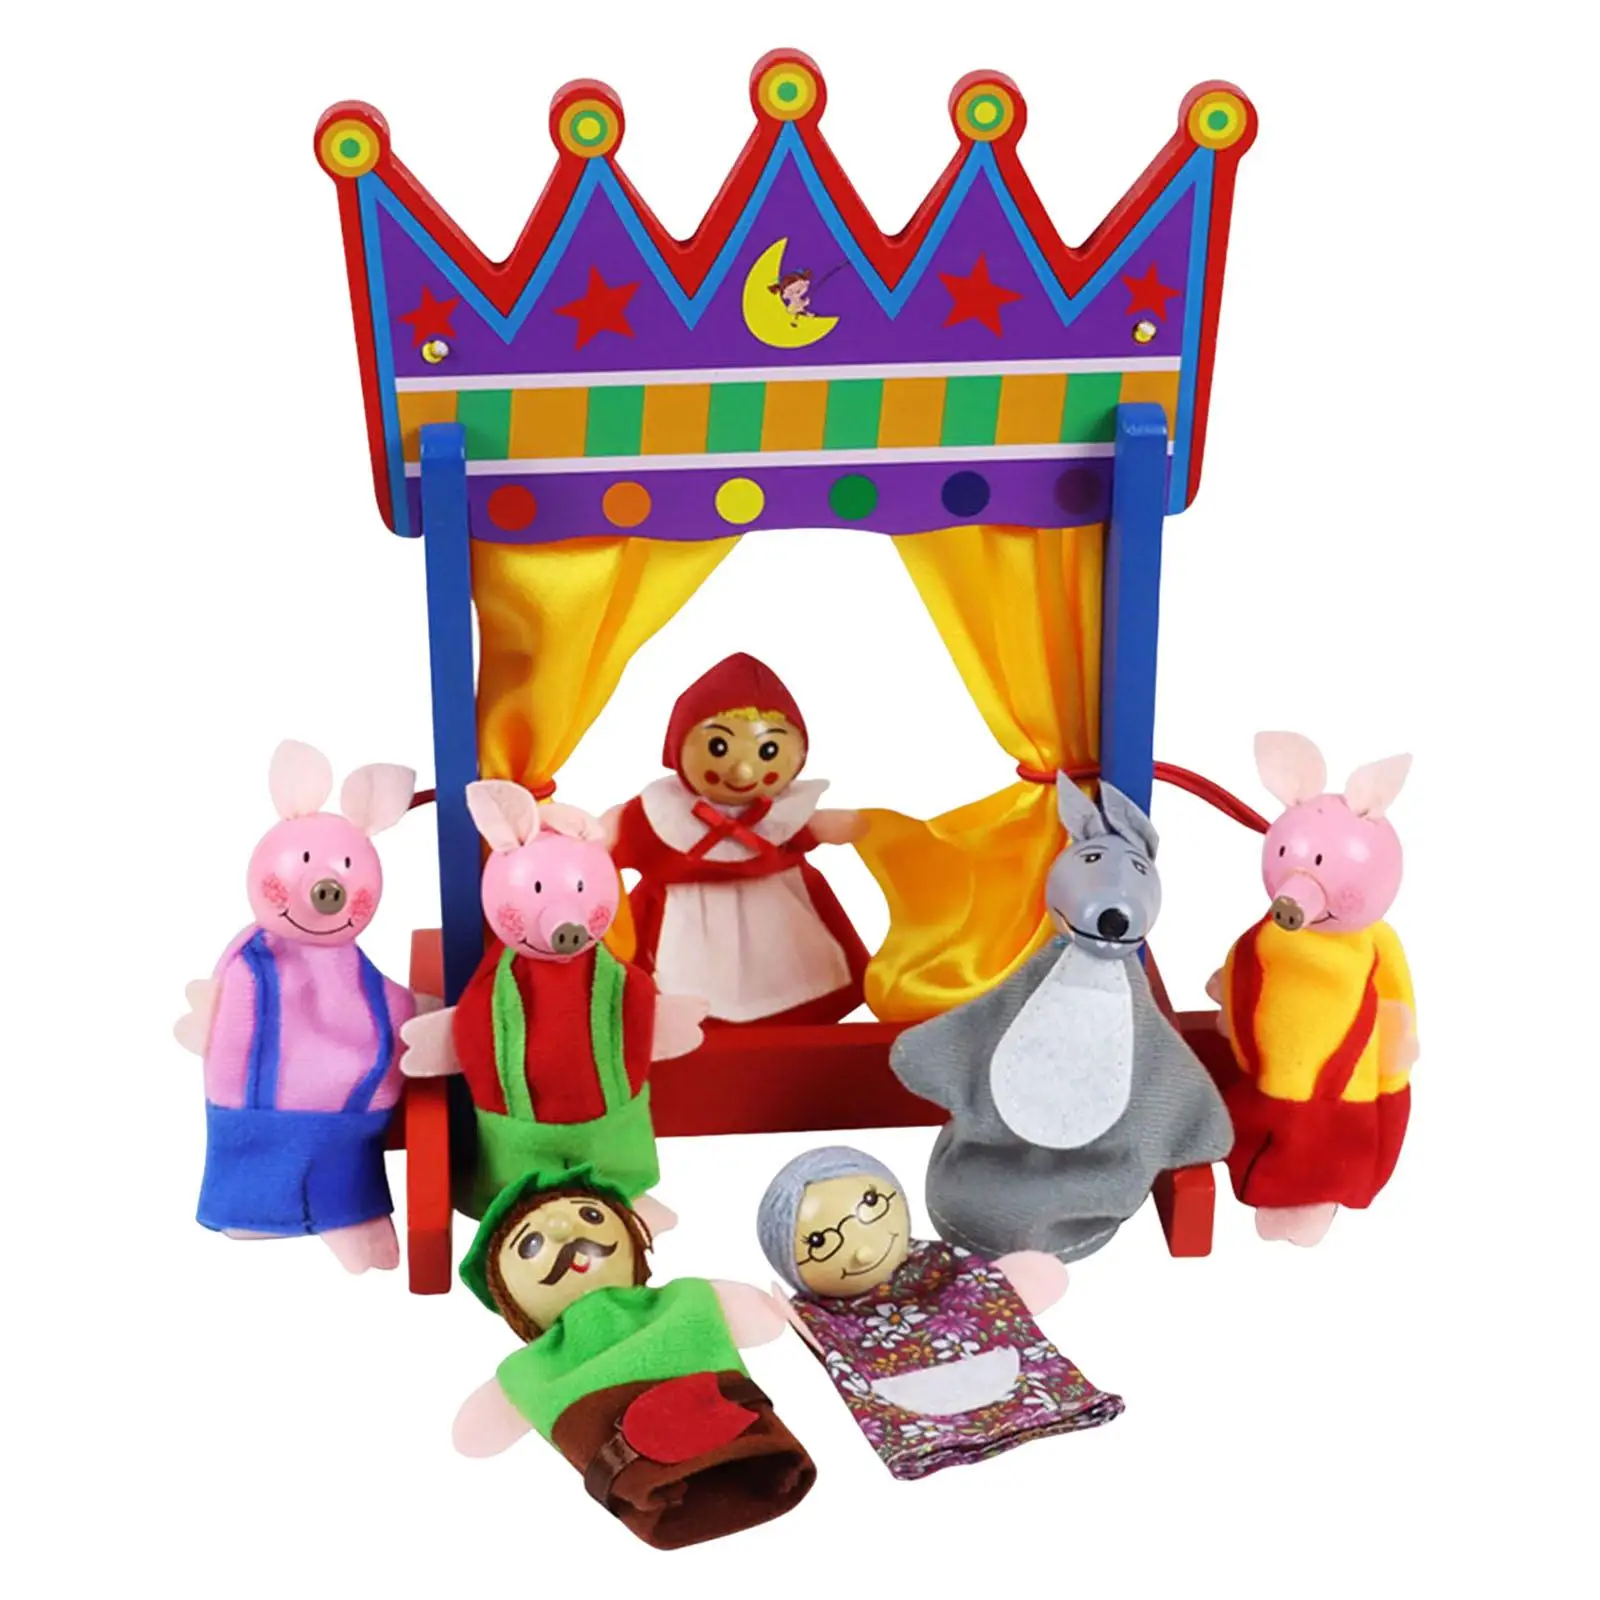 Simulation Mini Puppet Stand Set Decorations Finger Puppets for Preschool Role Play Games Activities Story Telling Girls Boys